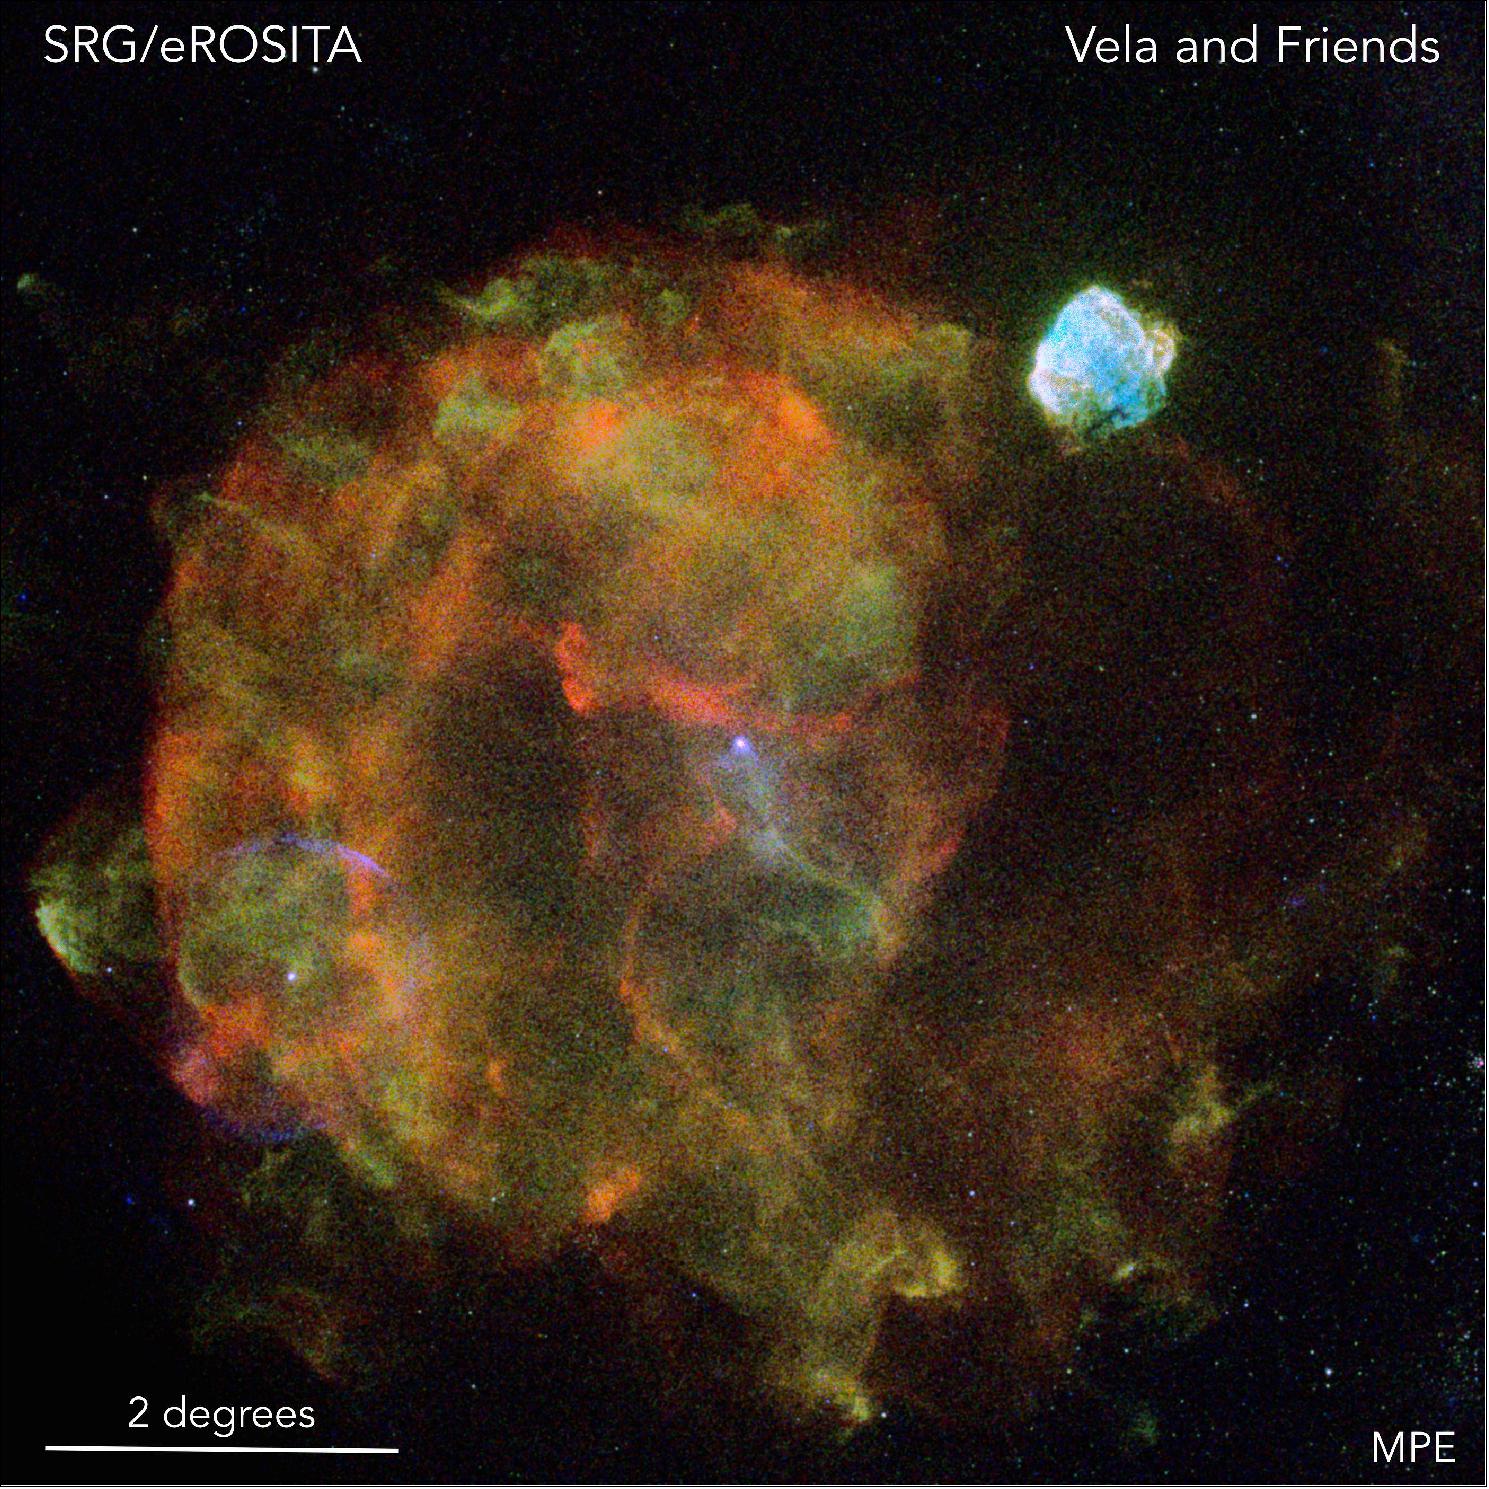 Figure 23: Due to its size and close distance to Earth, the "Vela supernova remnant" which is shown in this picture is one of the most prominent objects in the X-ray sky. The Vela supernova exploded about 12000 years ago at a distance of 800 light-years and overlaps with at least two other supernova remnants, Vela Junior (in the picture seen as bluish ring at the bottom left) and Puppis-A (top right). Vela Junior was discovered just 20 years ago, although this object is so close to Earth that remains of this explosion were found in polar ice cores. All three supernova explosions produced both the X-ray-bright supernova remnants and neutron stars, which shine as intense X-ray point sources near the centers of the remnants. The quality of the new eROSITA data of this "stellar cemetery" will give astronomers many exciting new insights into the physical processes operating in the hot supernova plasma as well as for exploring the exotic neutron stars (image credit: Peter Predehl, Werner Becker (MPE), Davide Mella)